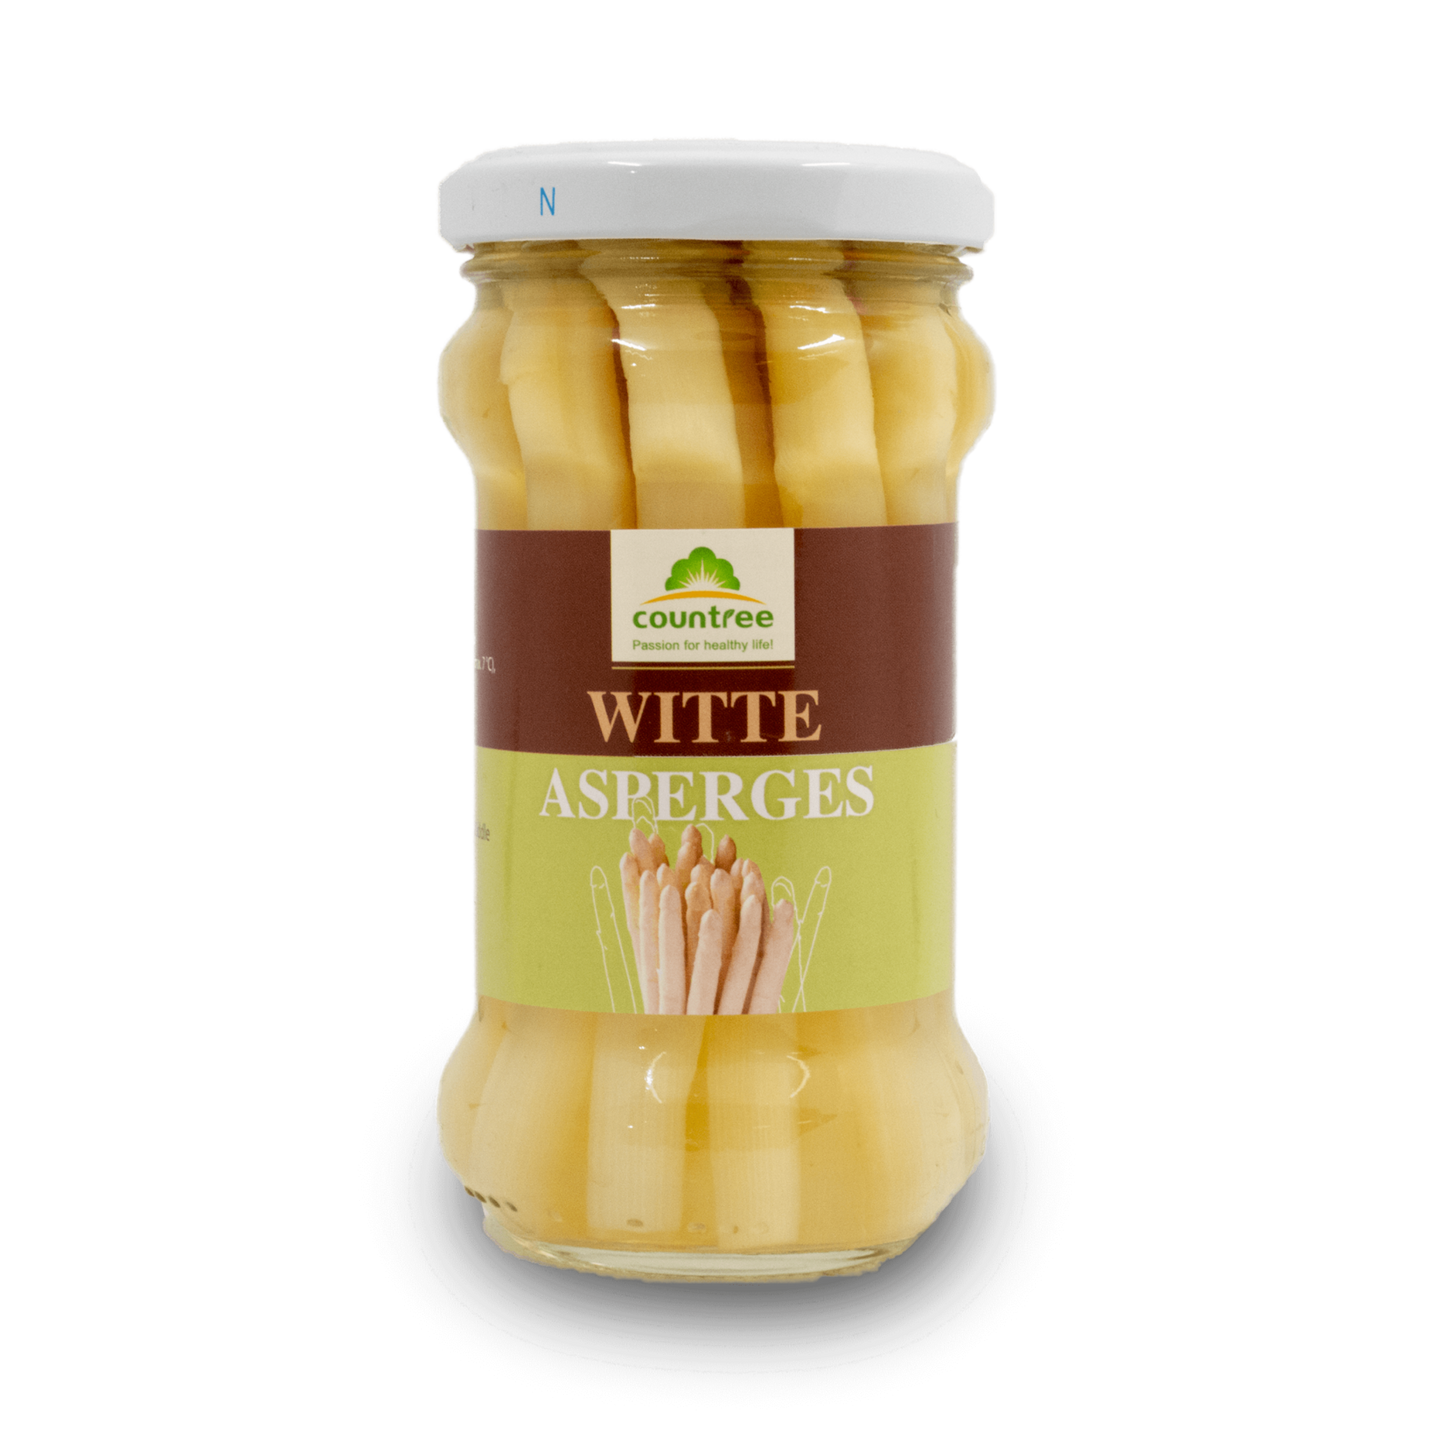 COUNTREE Witte Asperges